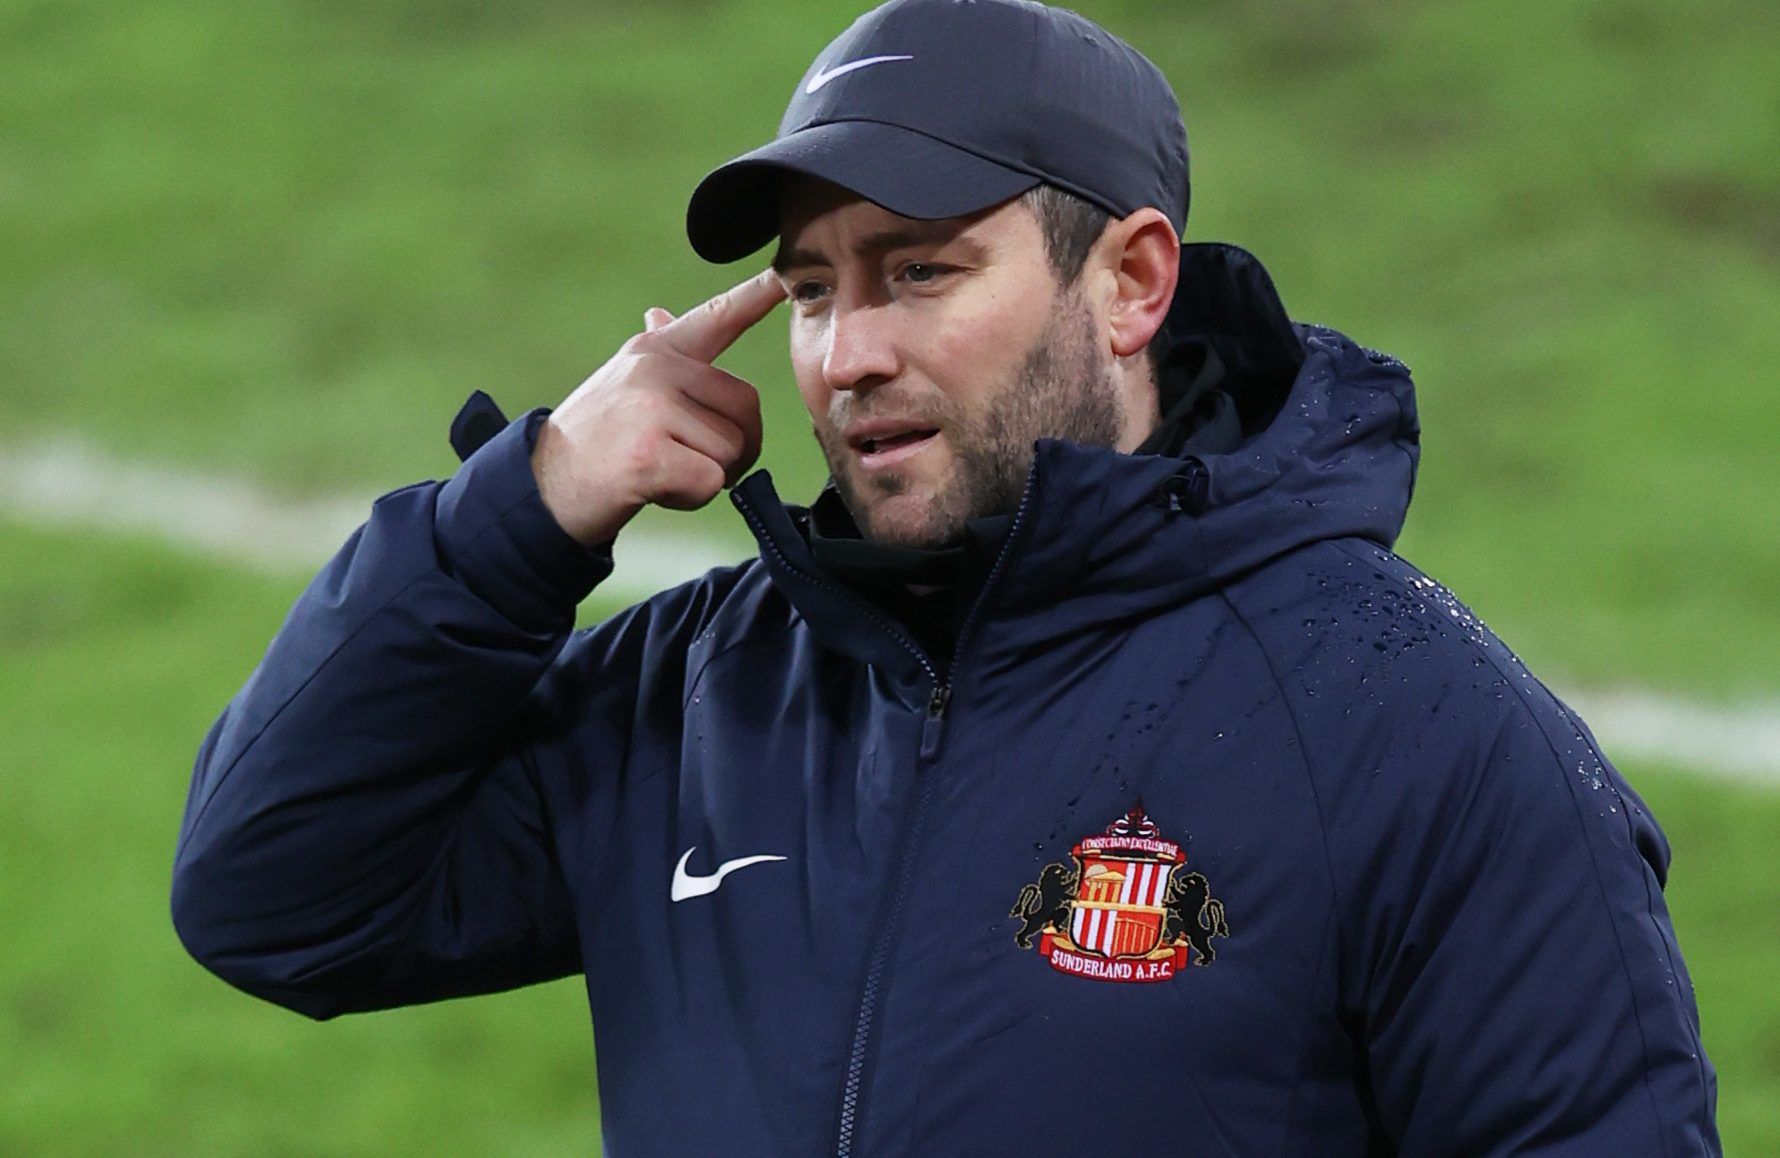 Soccer Football - League One - Sunderland v Plymouth Argyle - Stadium of Light, Sunderland, Britain - January 19, 2021 Sunderland's manager Lee Johnson during the match Action Images/Lee Smith EDITORIAL USE ONLY. No use with unauthorized audio, video, data, fixture lists, club/league logos or 'live' services. Online in-match use limited to 75 images, no video emulation. No use in betting, games or single club /league/player publications.  Please contact your account representative for further de